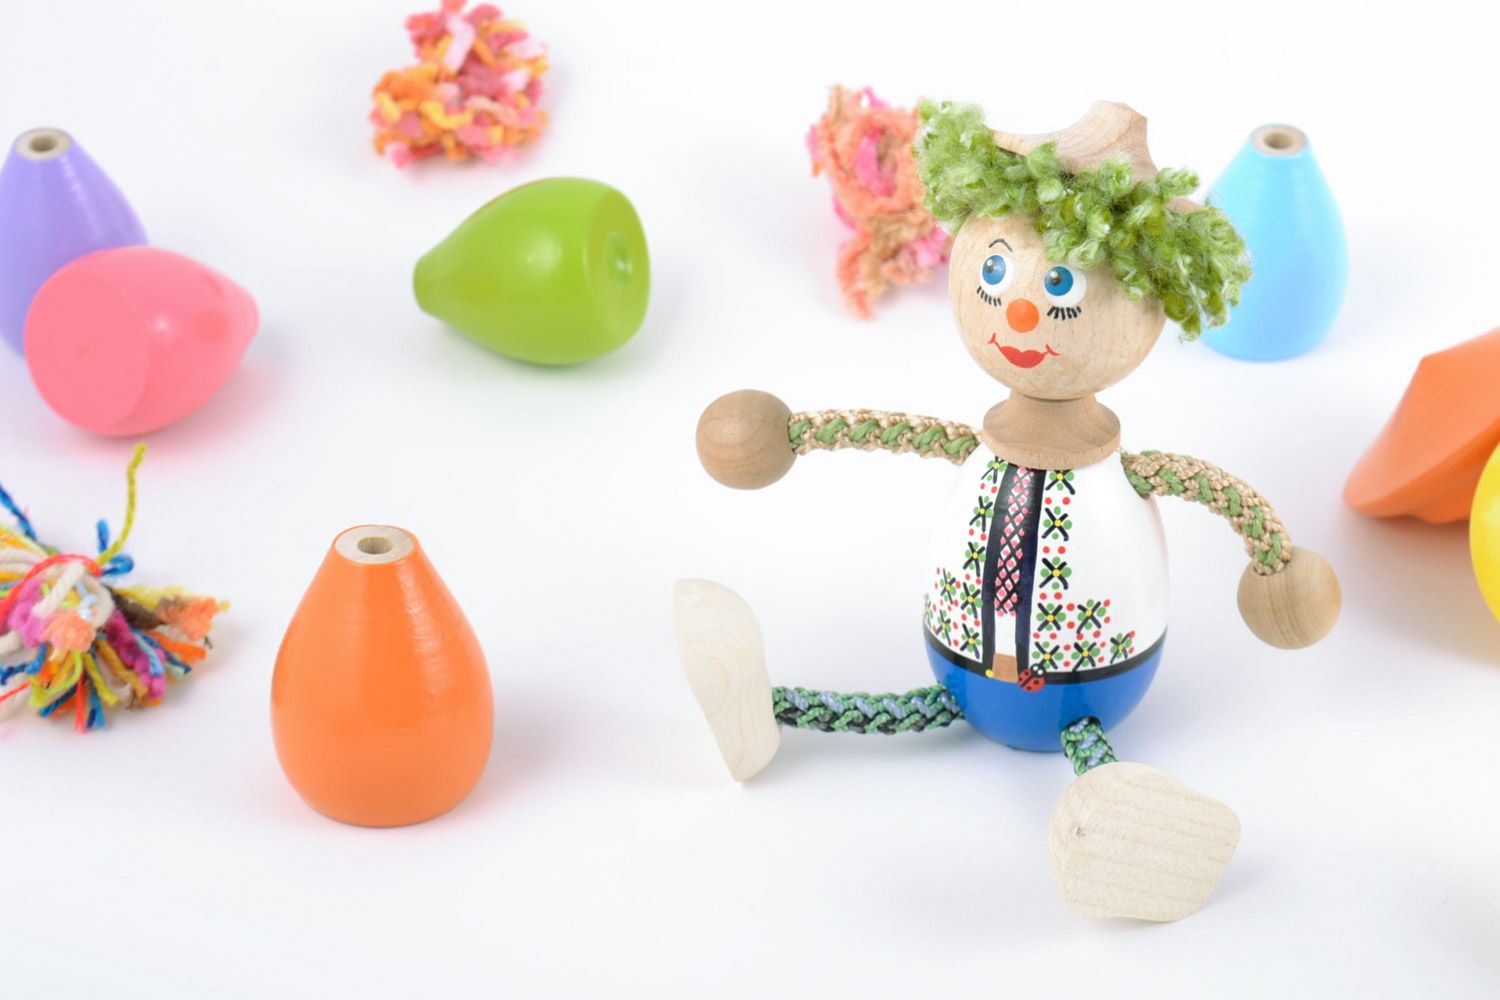 Painted handmade wooden eco toy clown with green hair photo 1